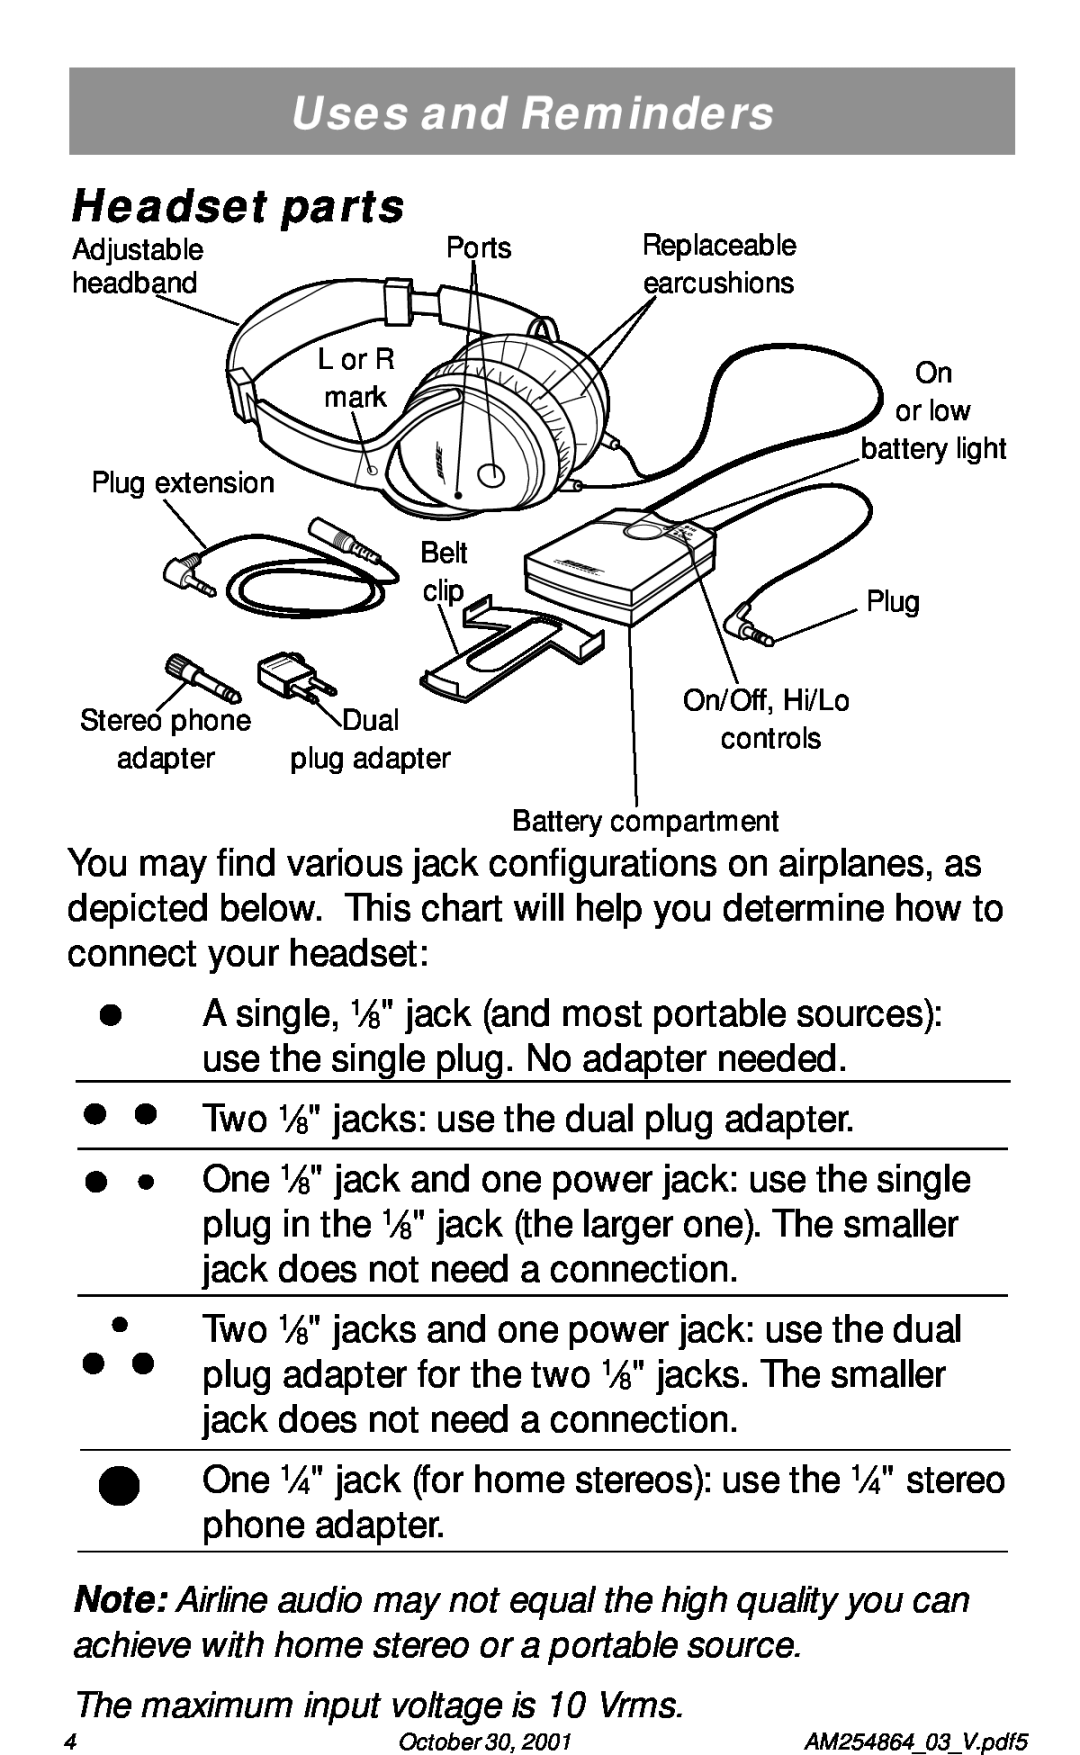 Bose Acoustic Noise Cancelling Headset manual Headset parts, Uses and Reminders, The maximum input voltage is 10 Vrms 